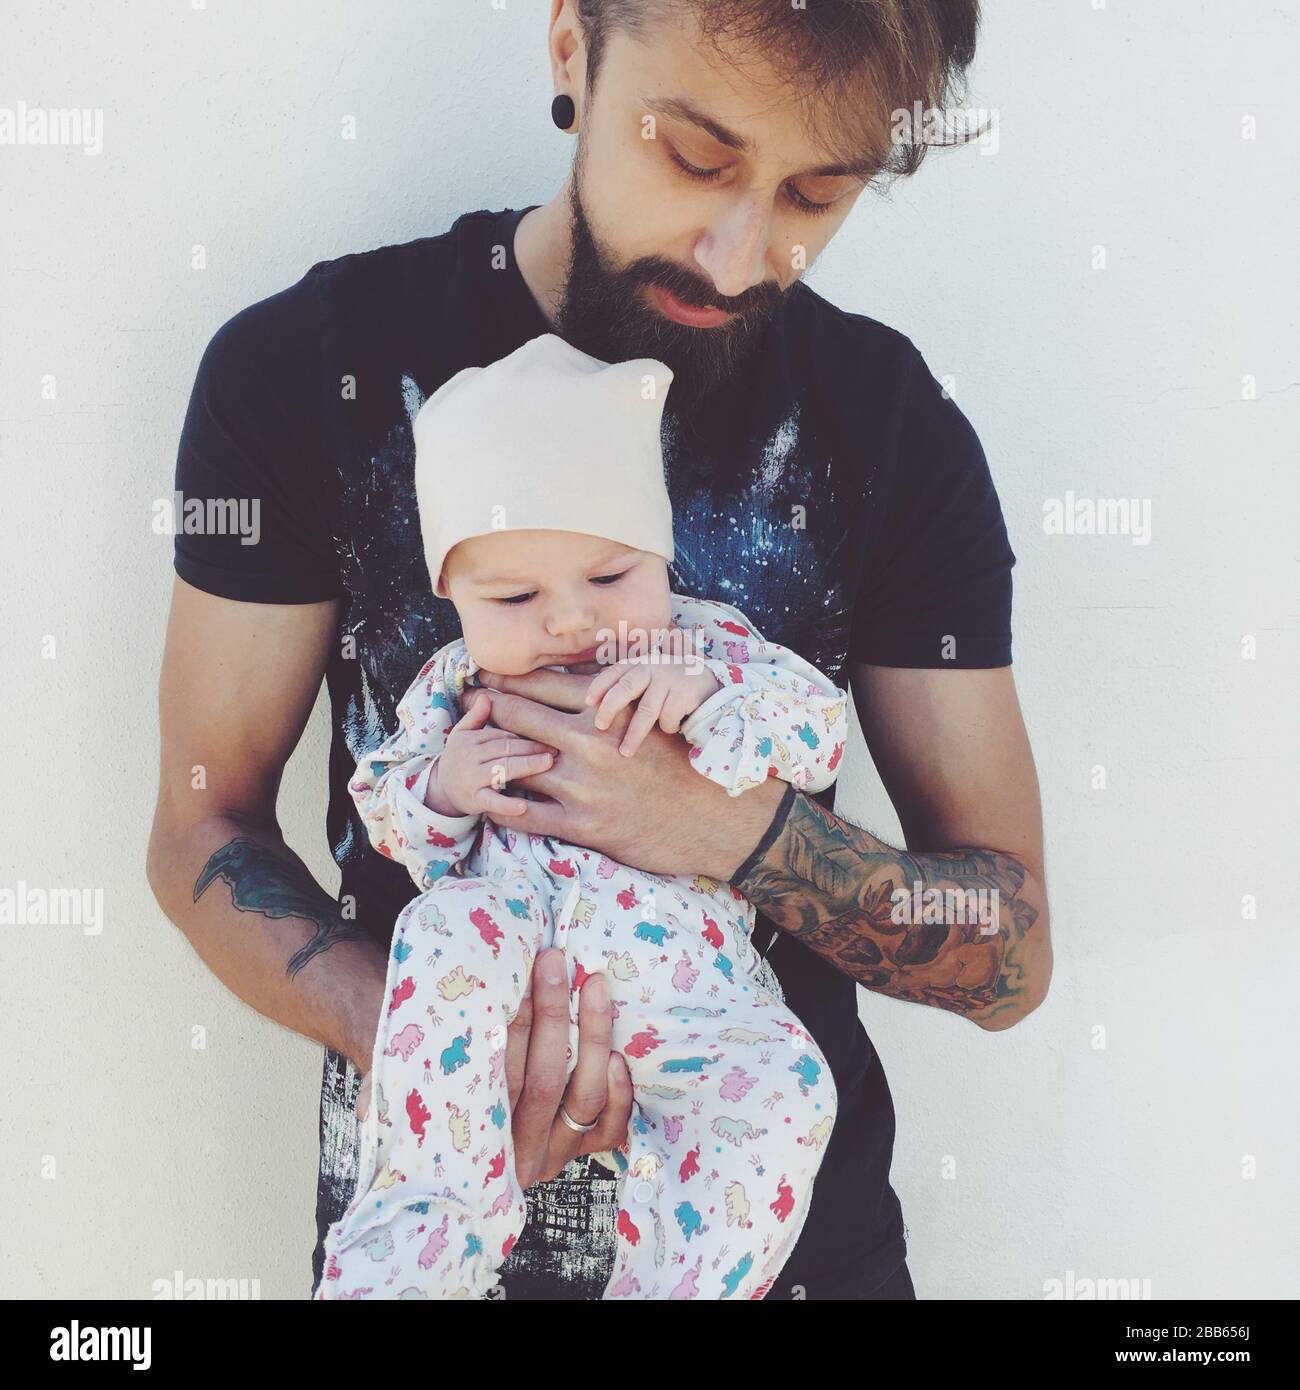 Portrait of a man holding his baby girl Stock Photo